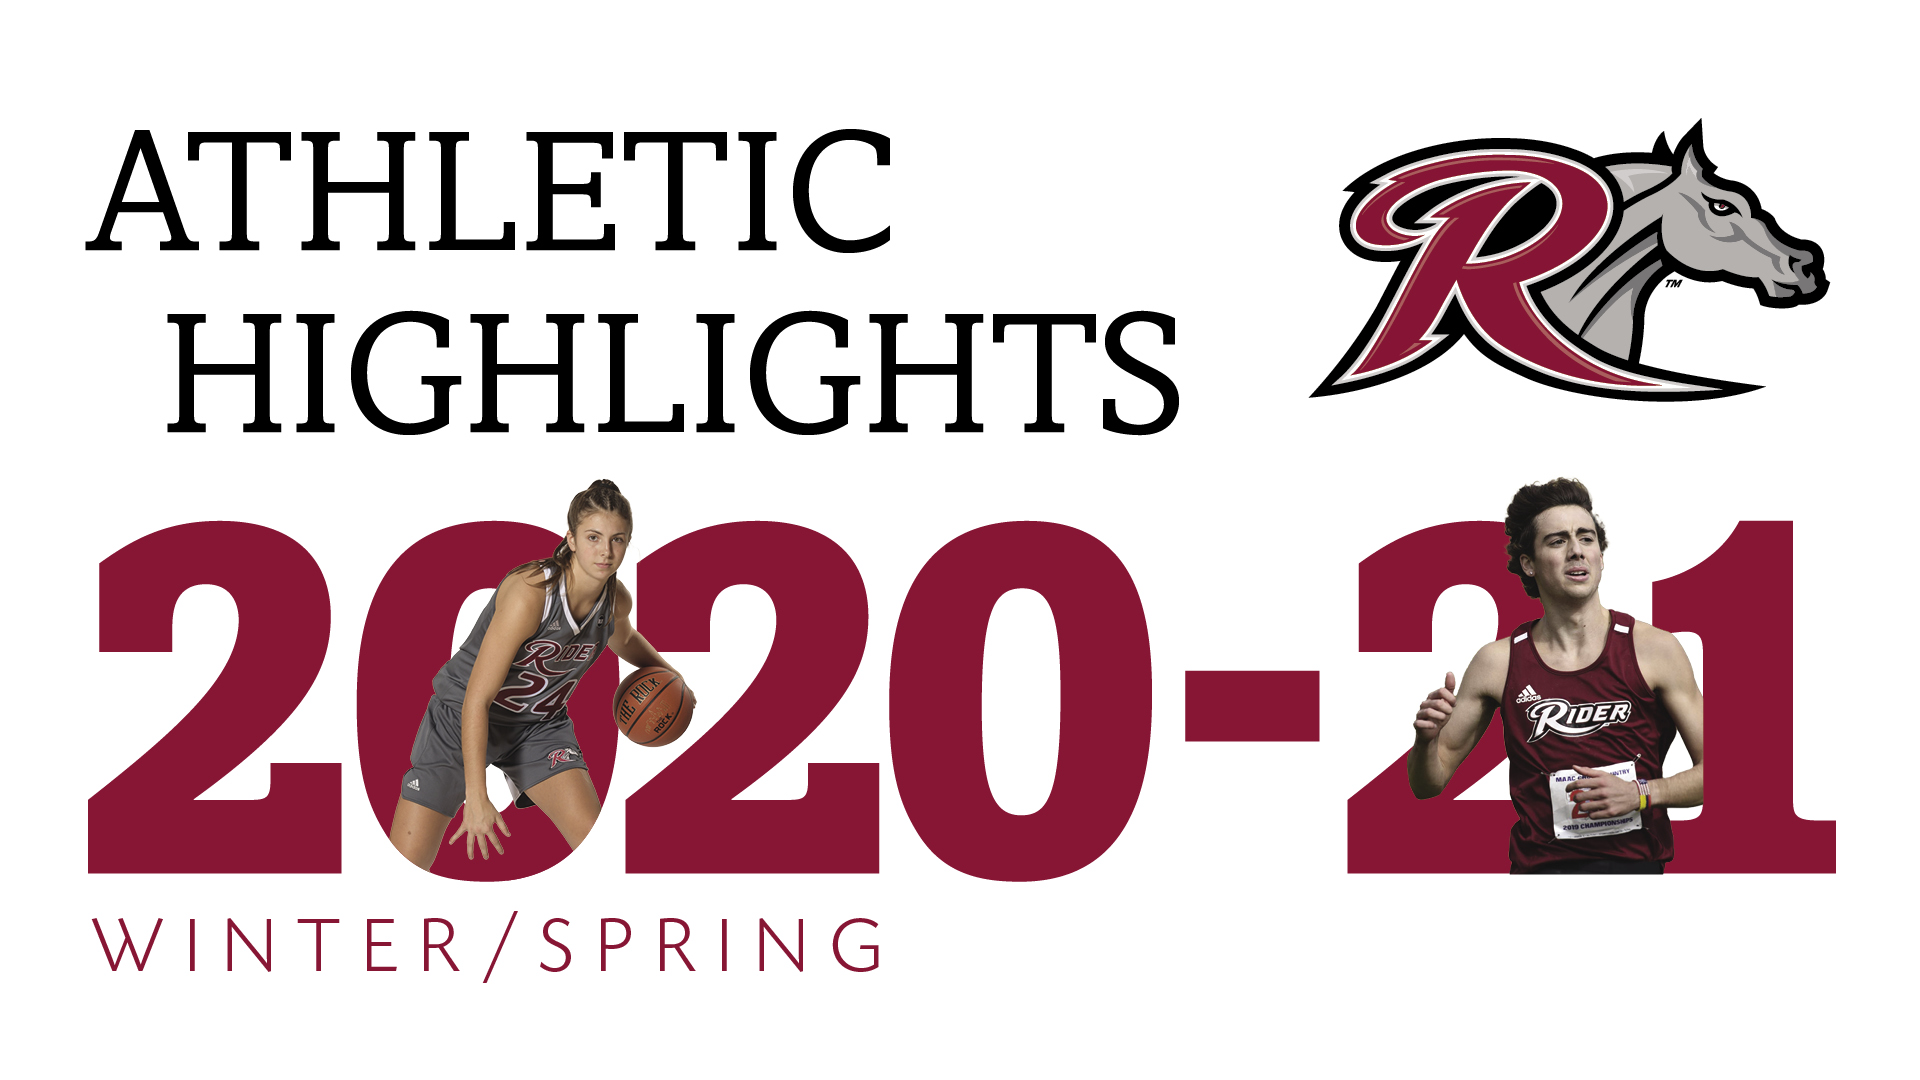 Athletic highlights